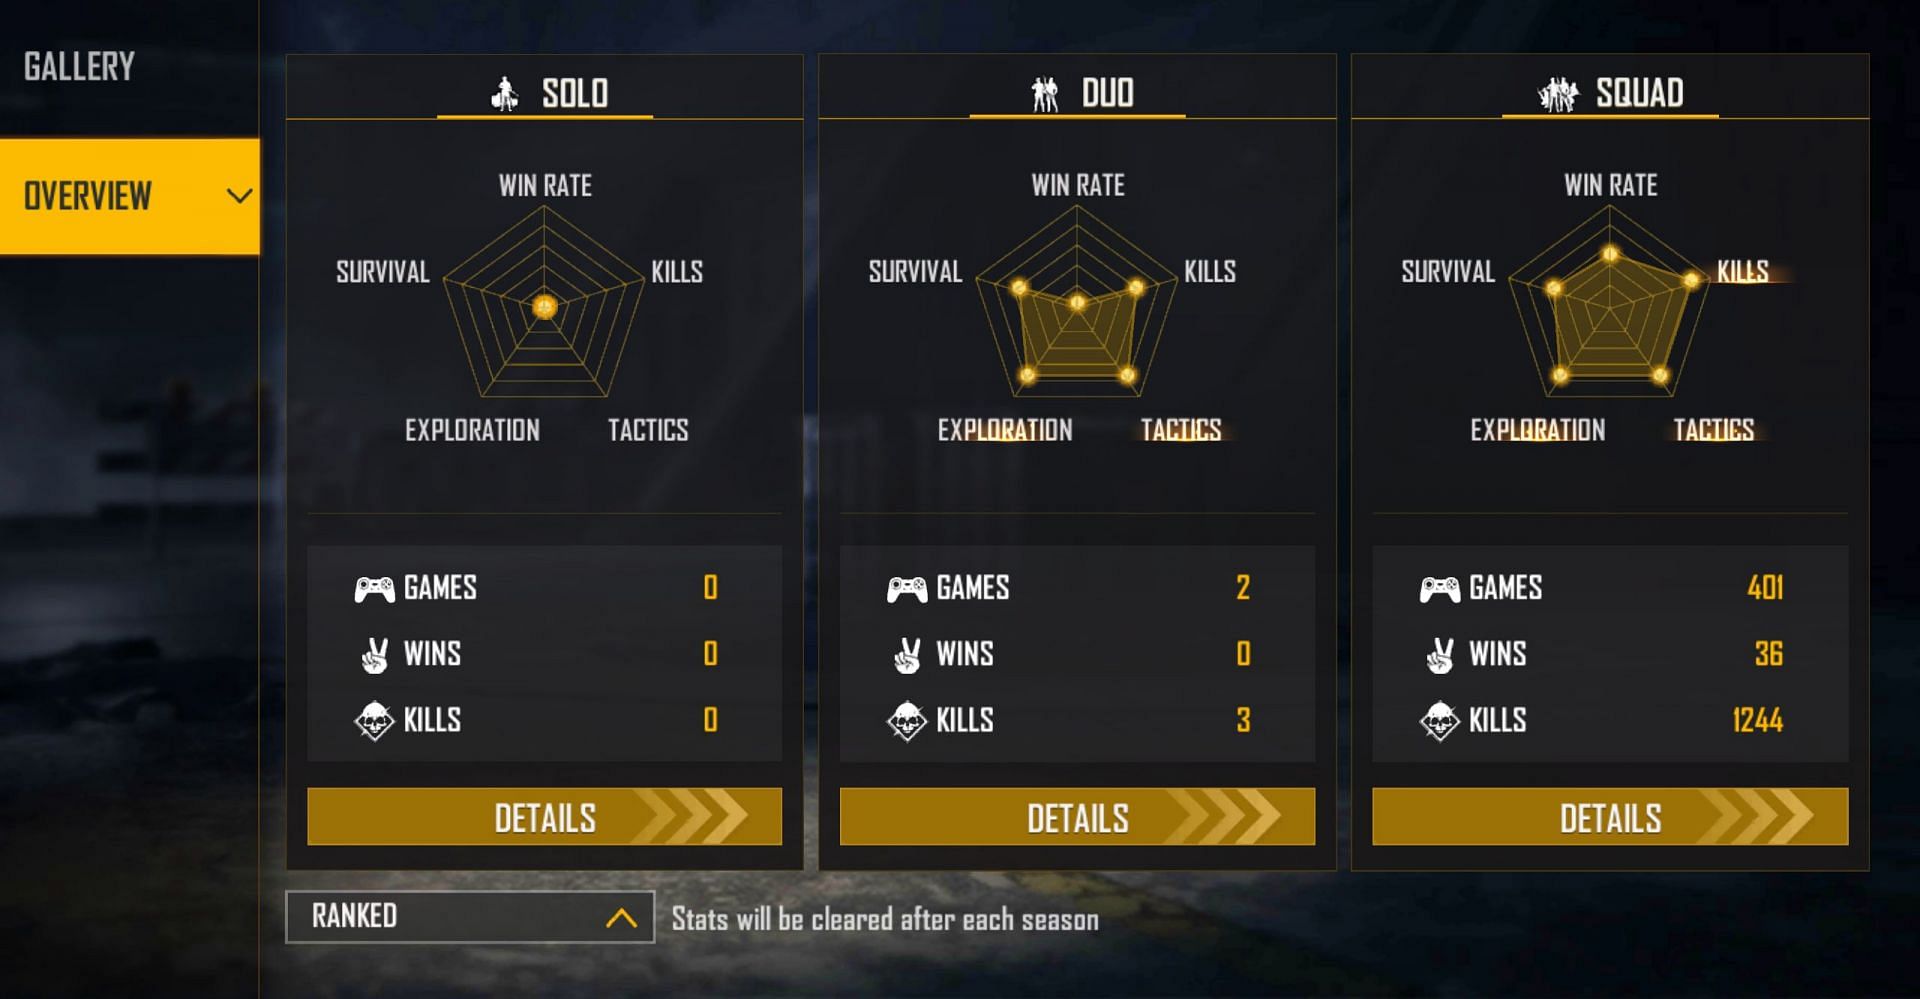 M8N has not won a ranked duo game yet (Image via Free Fire)